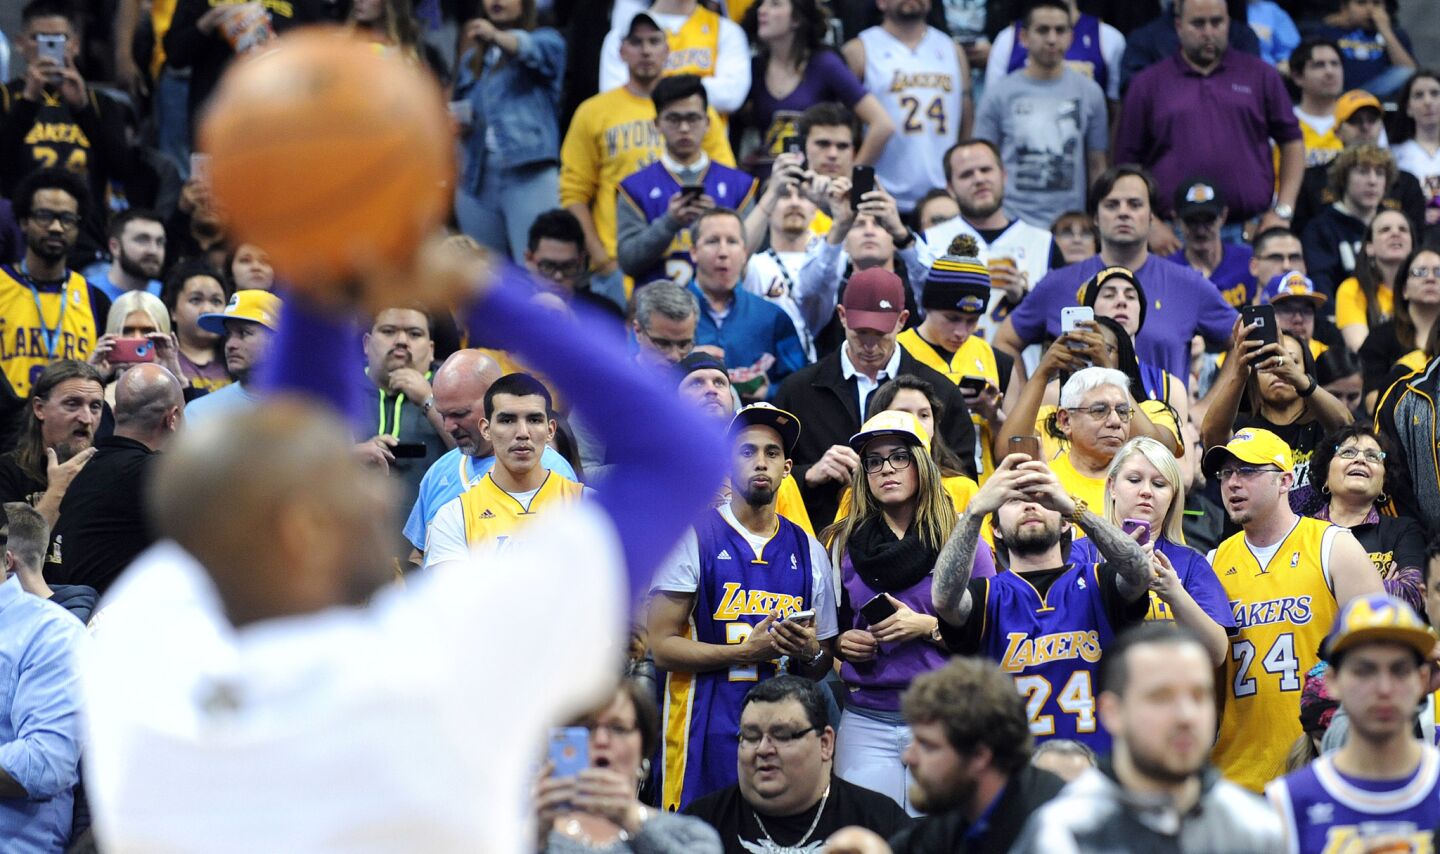 Lakers fans watch Kobe Bryant warm up before a game againstthe Nuggets in Denver on March 2, 2016.